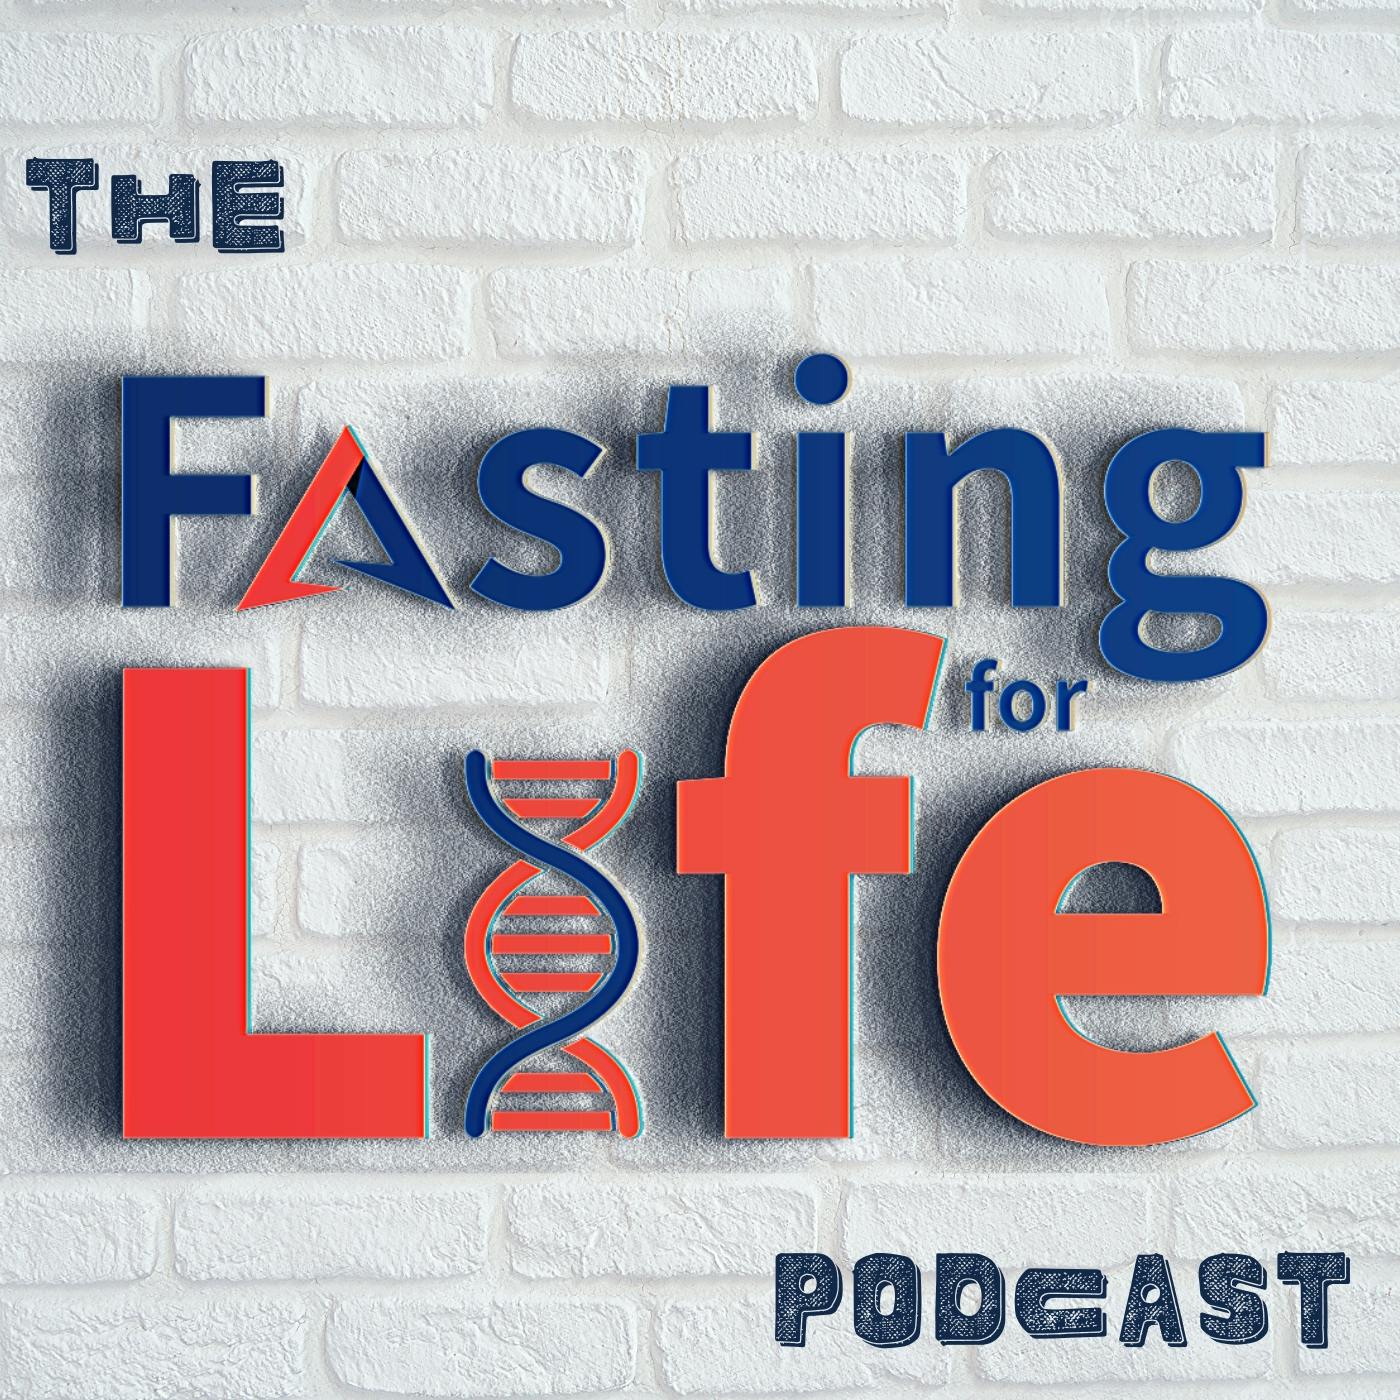 Ep. 188 - Exercise before or after meals to lower blood sugar | Is it best to rest or walk after dinner? | Adapting your fasting to any lifestyle to burn fat, improve hyperglycemia control, & reduce c